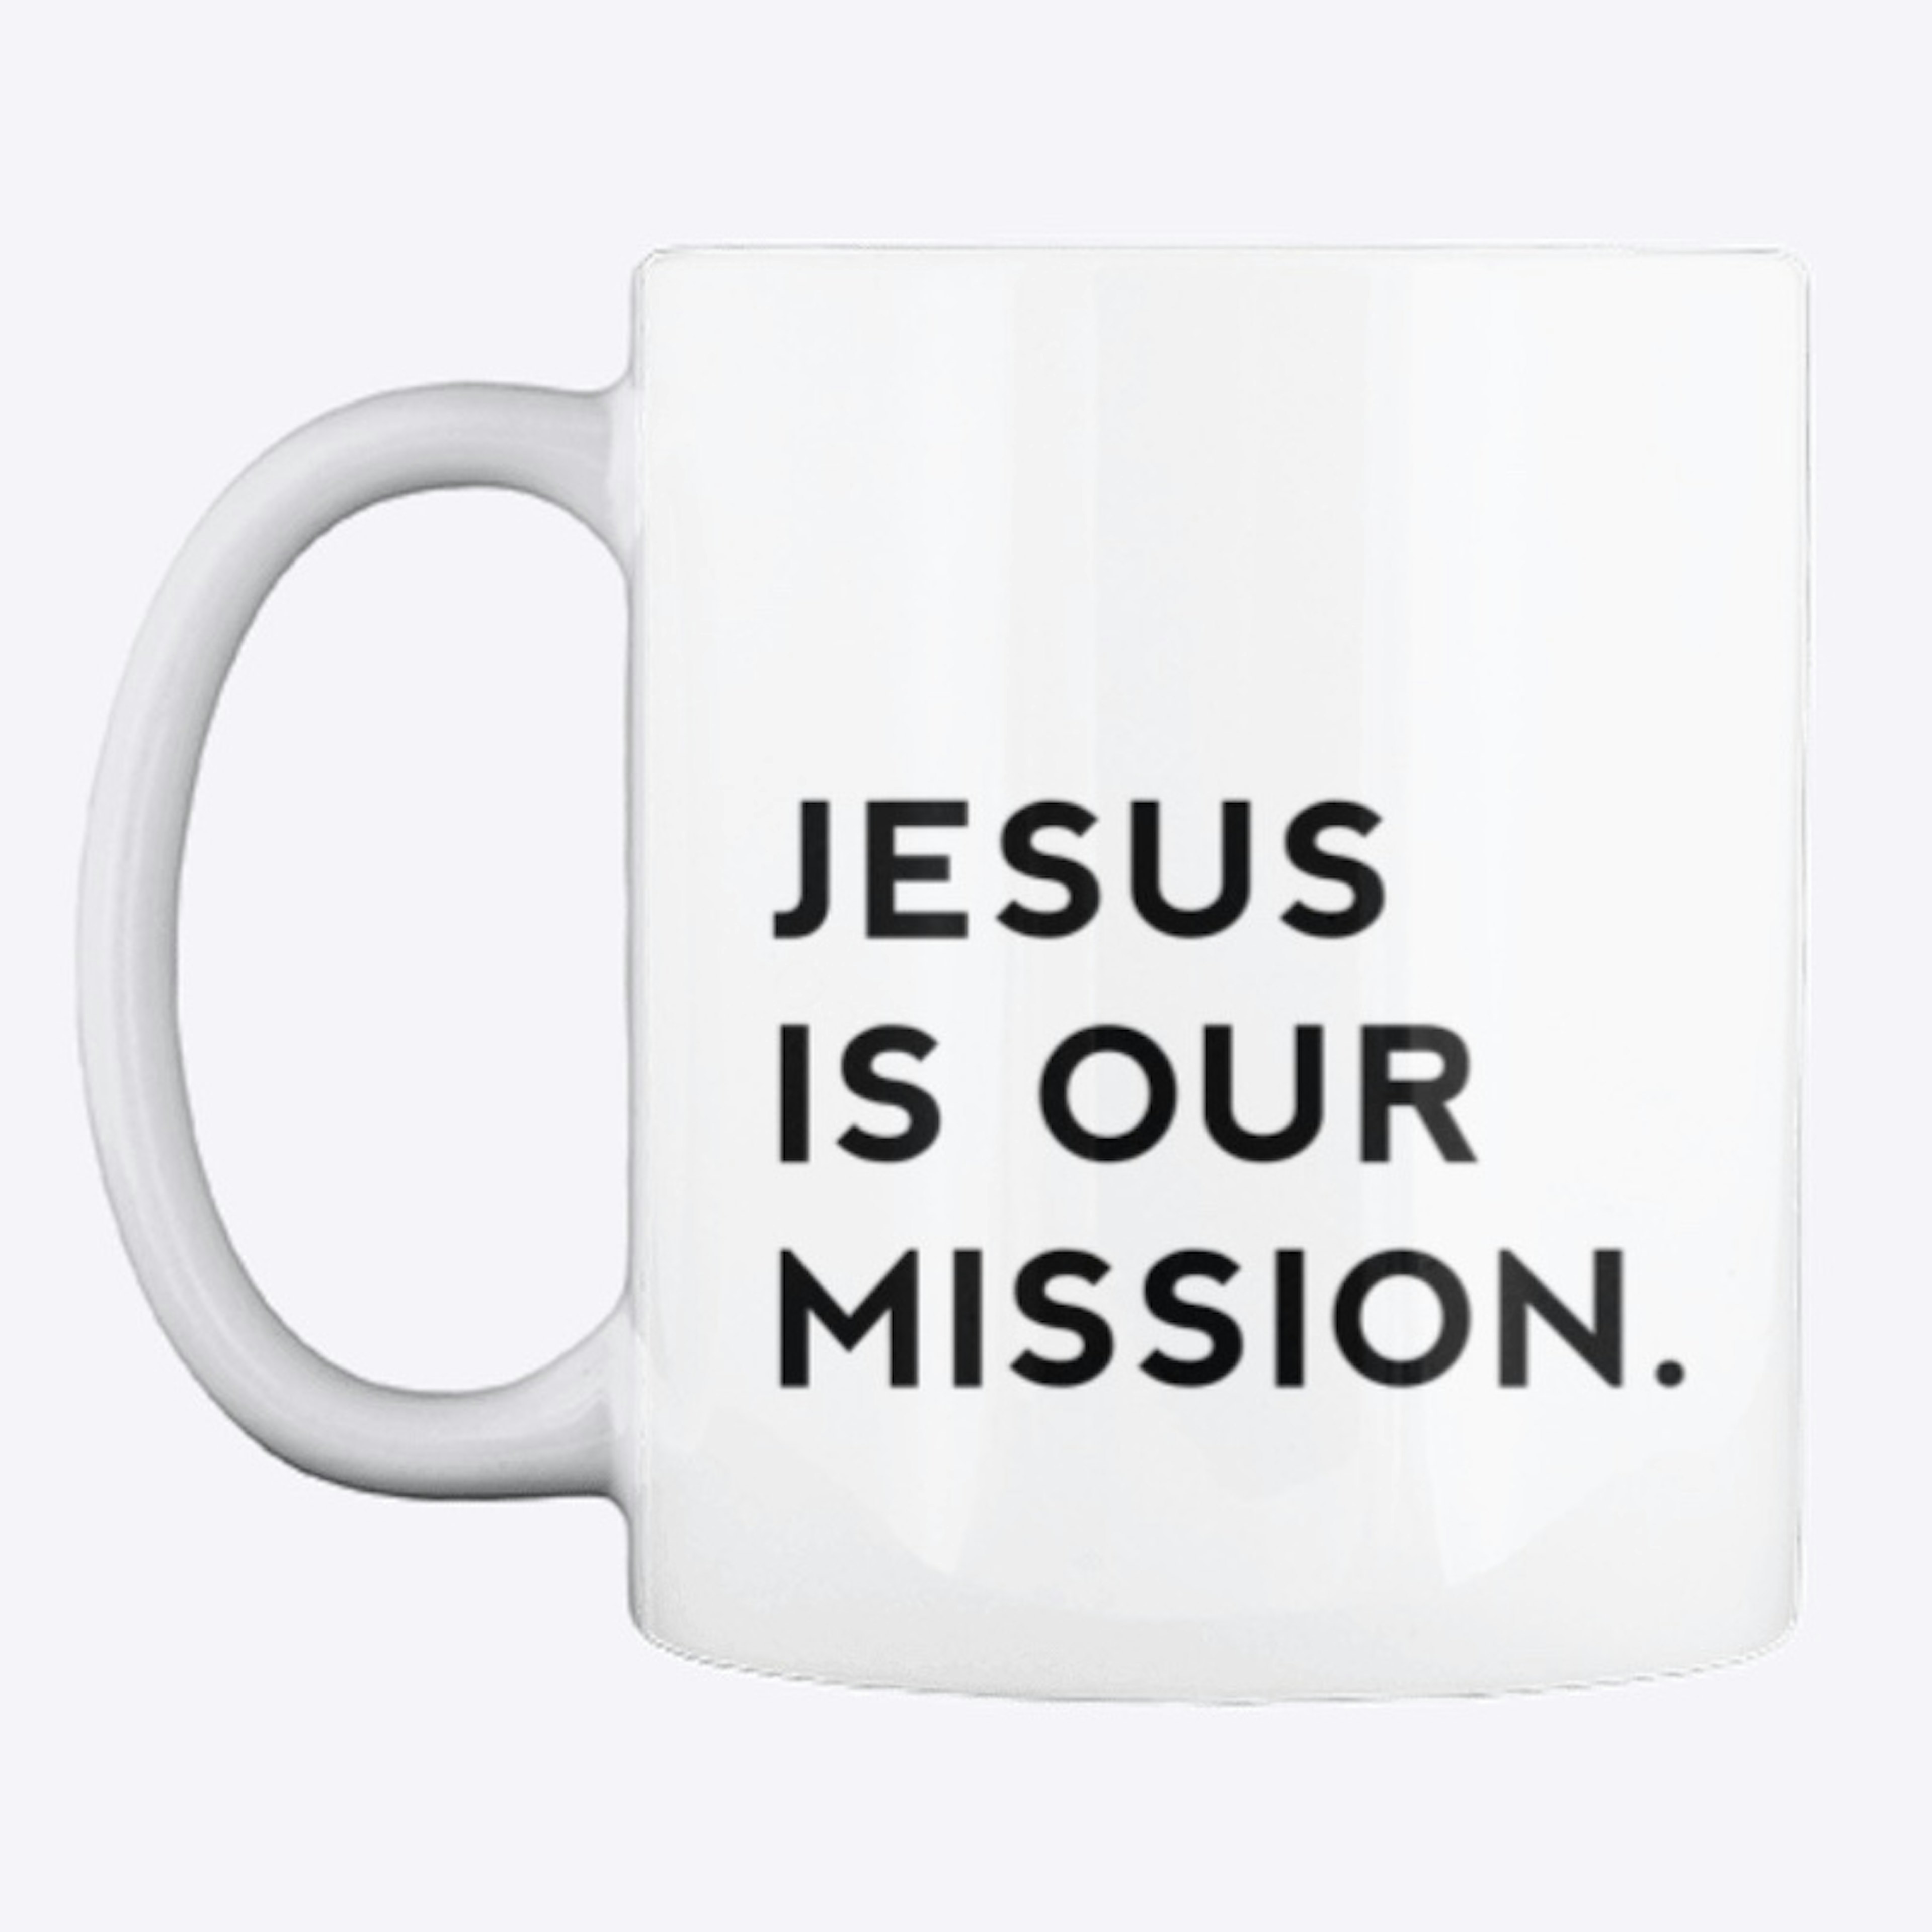 JESUS IS OUR MISSION